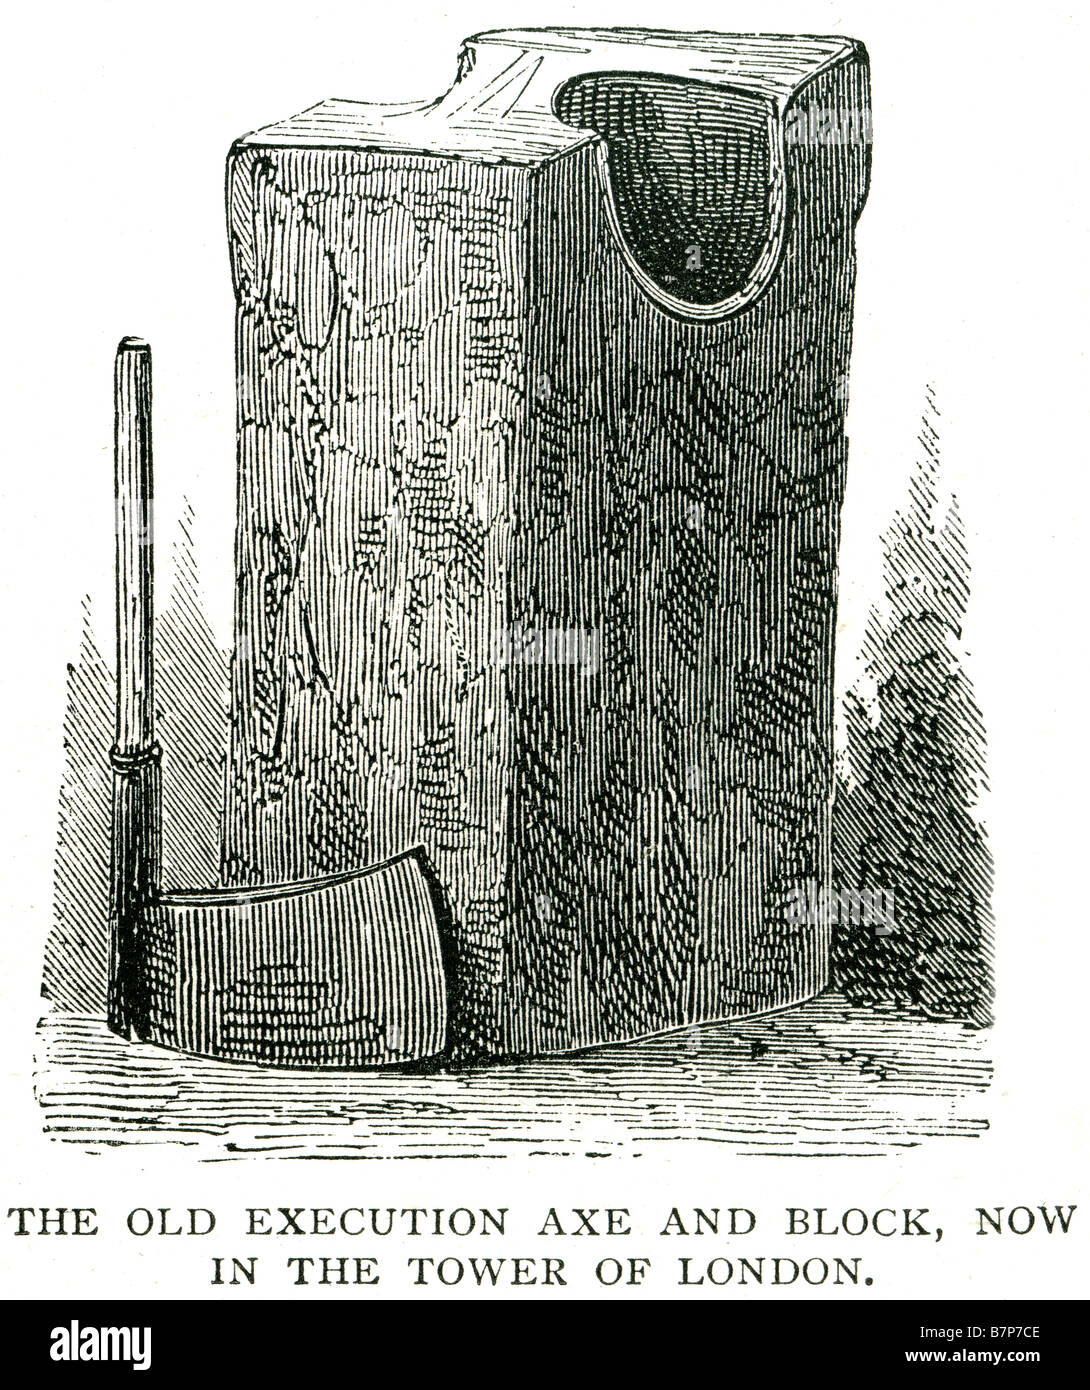 Old execution beheaded cutting executioner decapitation sword knife wire guillotine Axe Block Tower London England UK GB Stock Photo